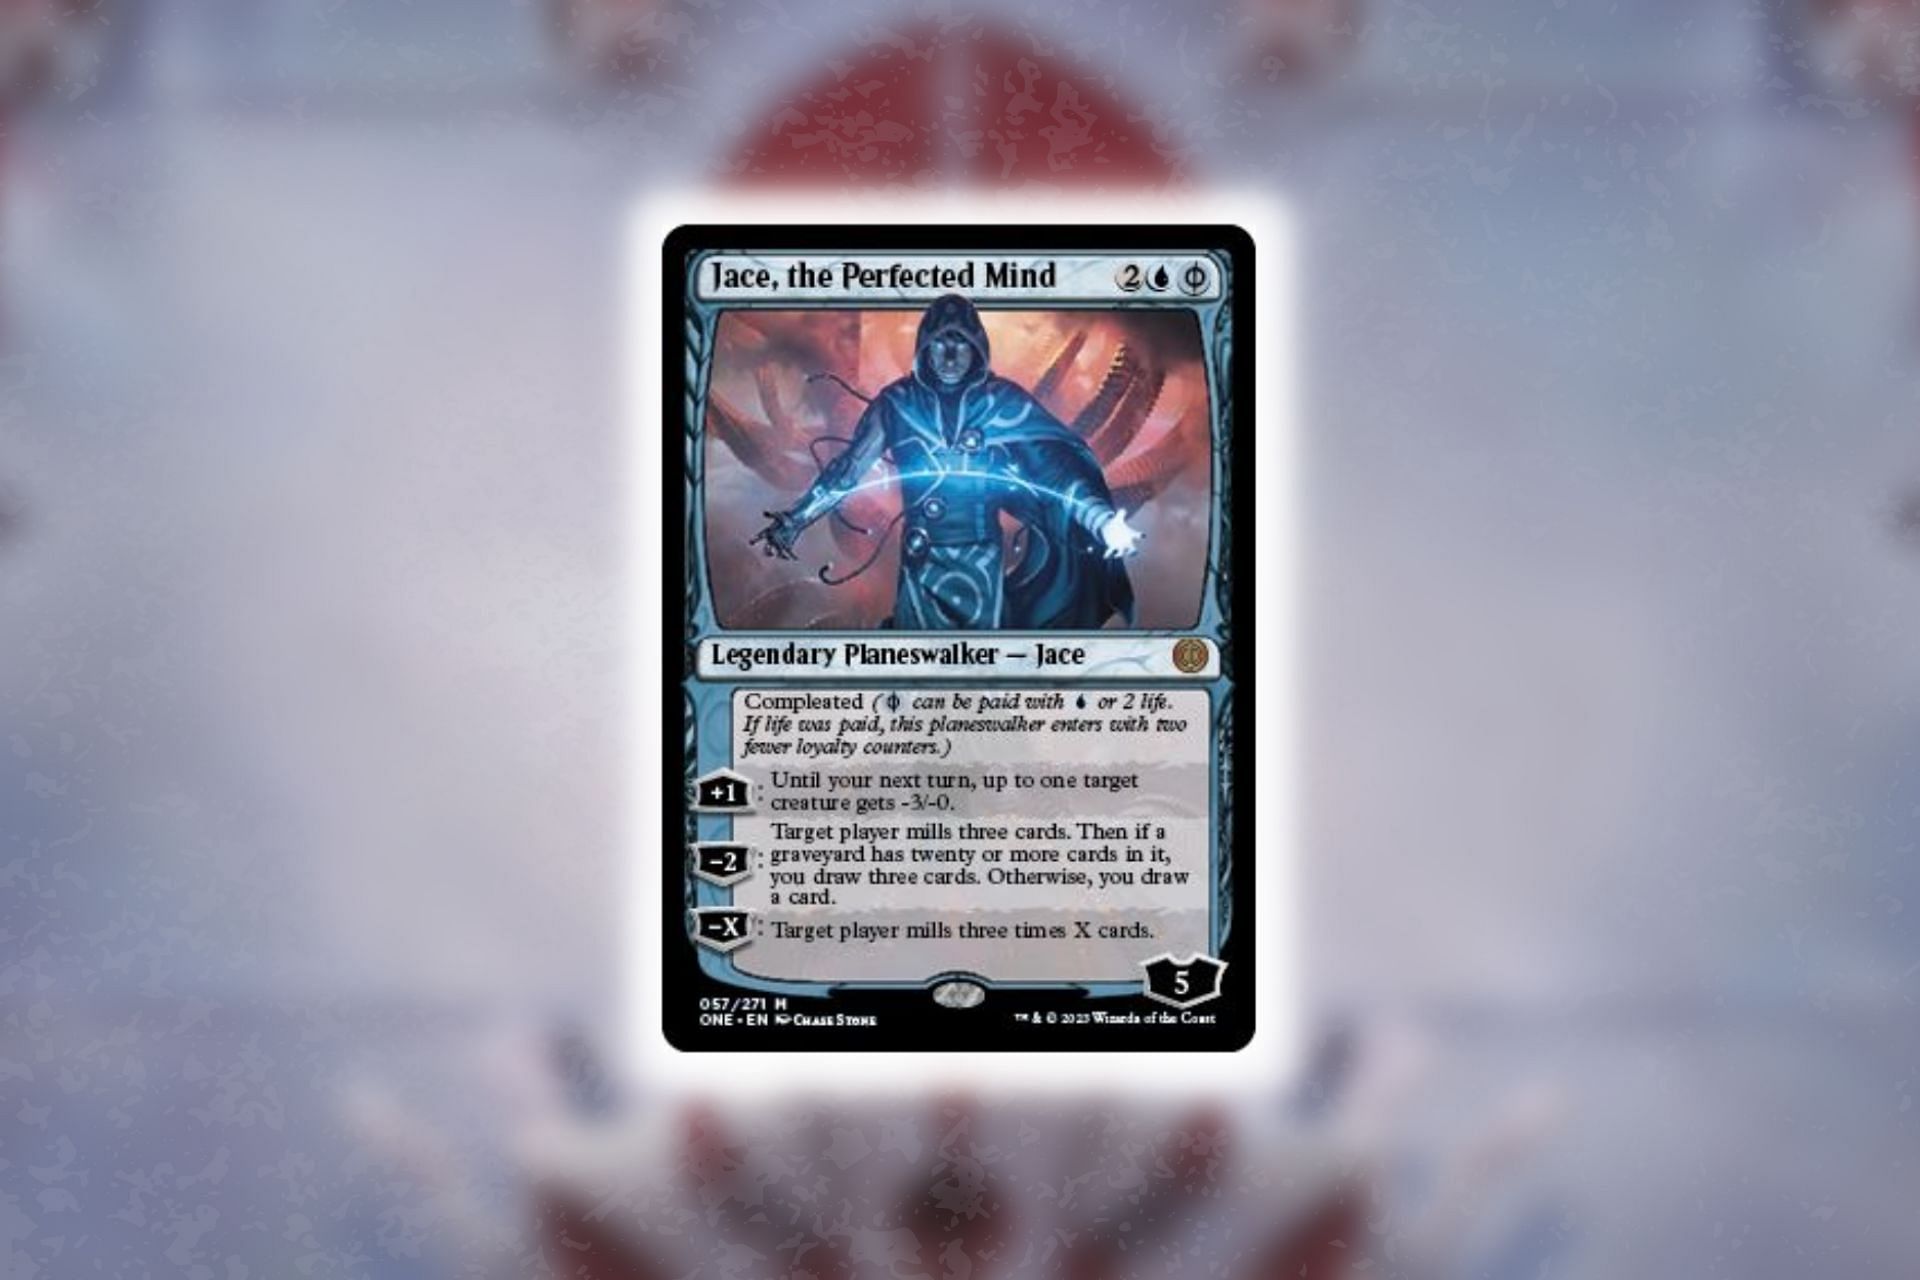 Jace, the Perfected Mind in Magic: The Gathering (Image via Wizards of the Coast)